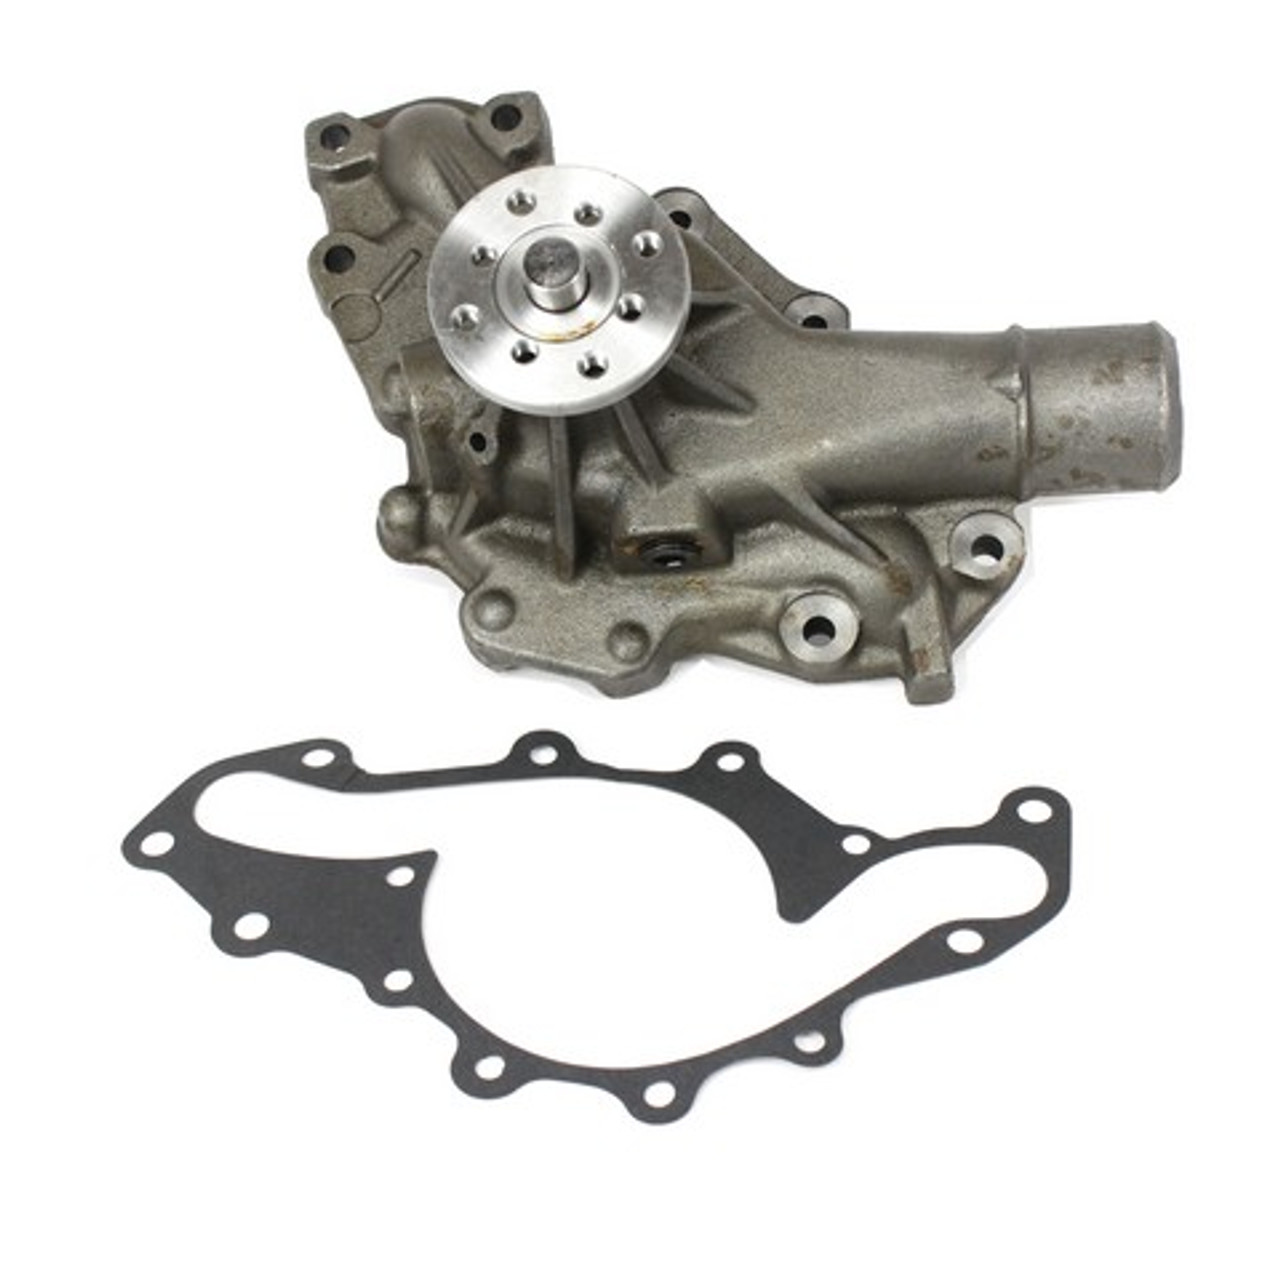 Water Pump 6.5L 1996 Chevrolet Tahoe - WP3195A.59